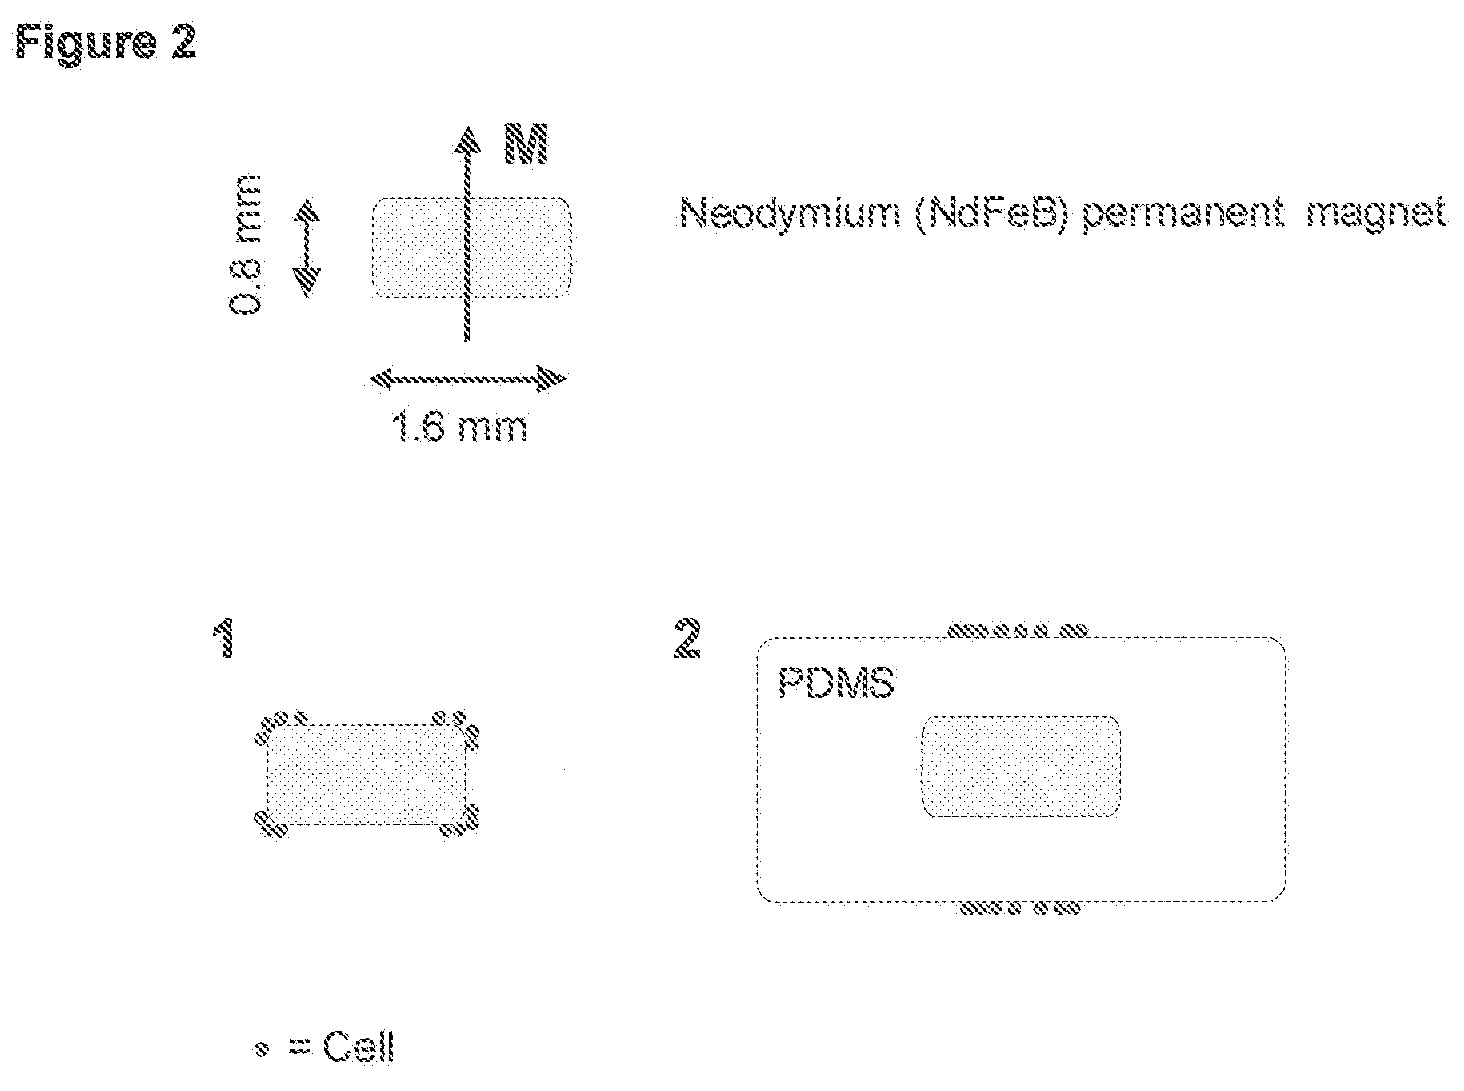 Method and apparatus for imaging target components in a biological sample using permanent magnets